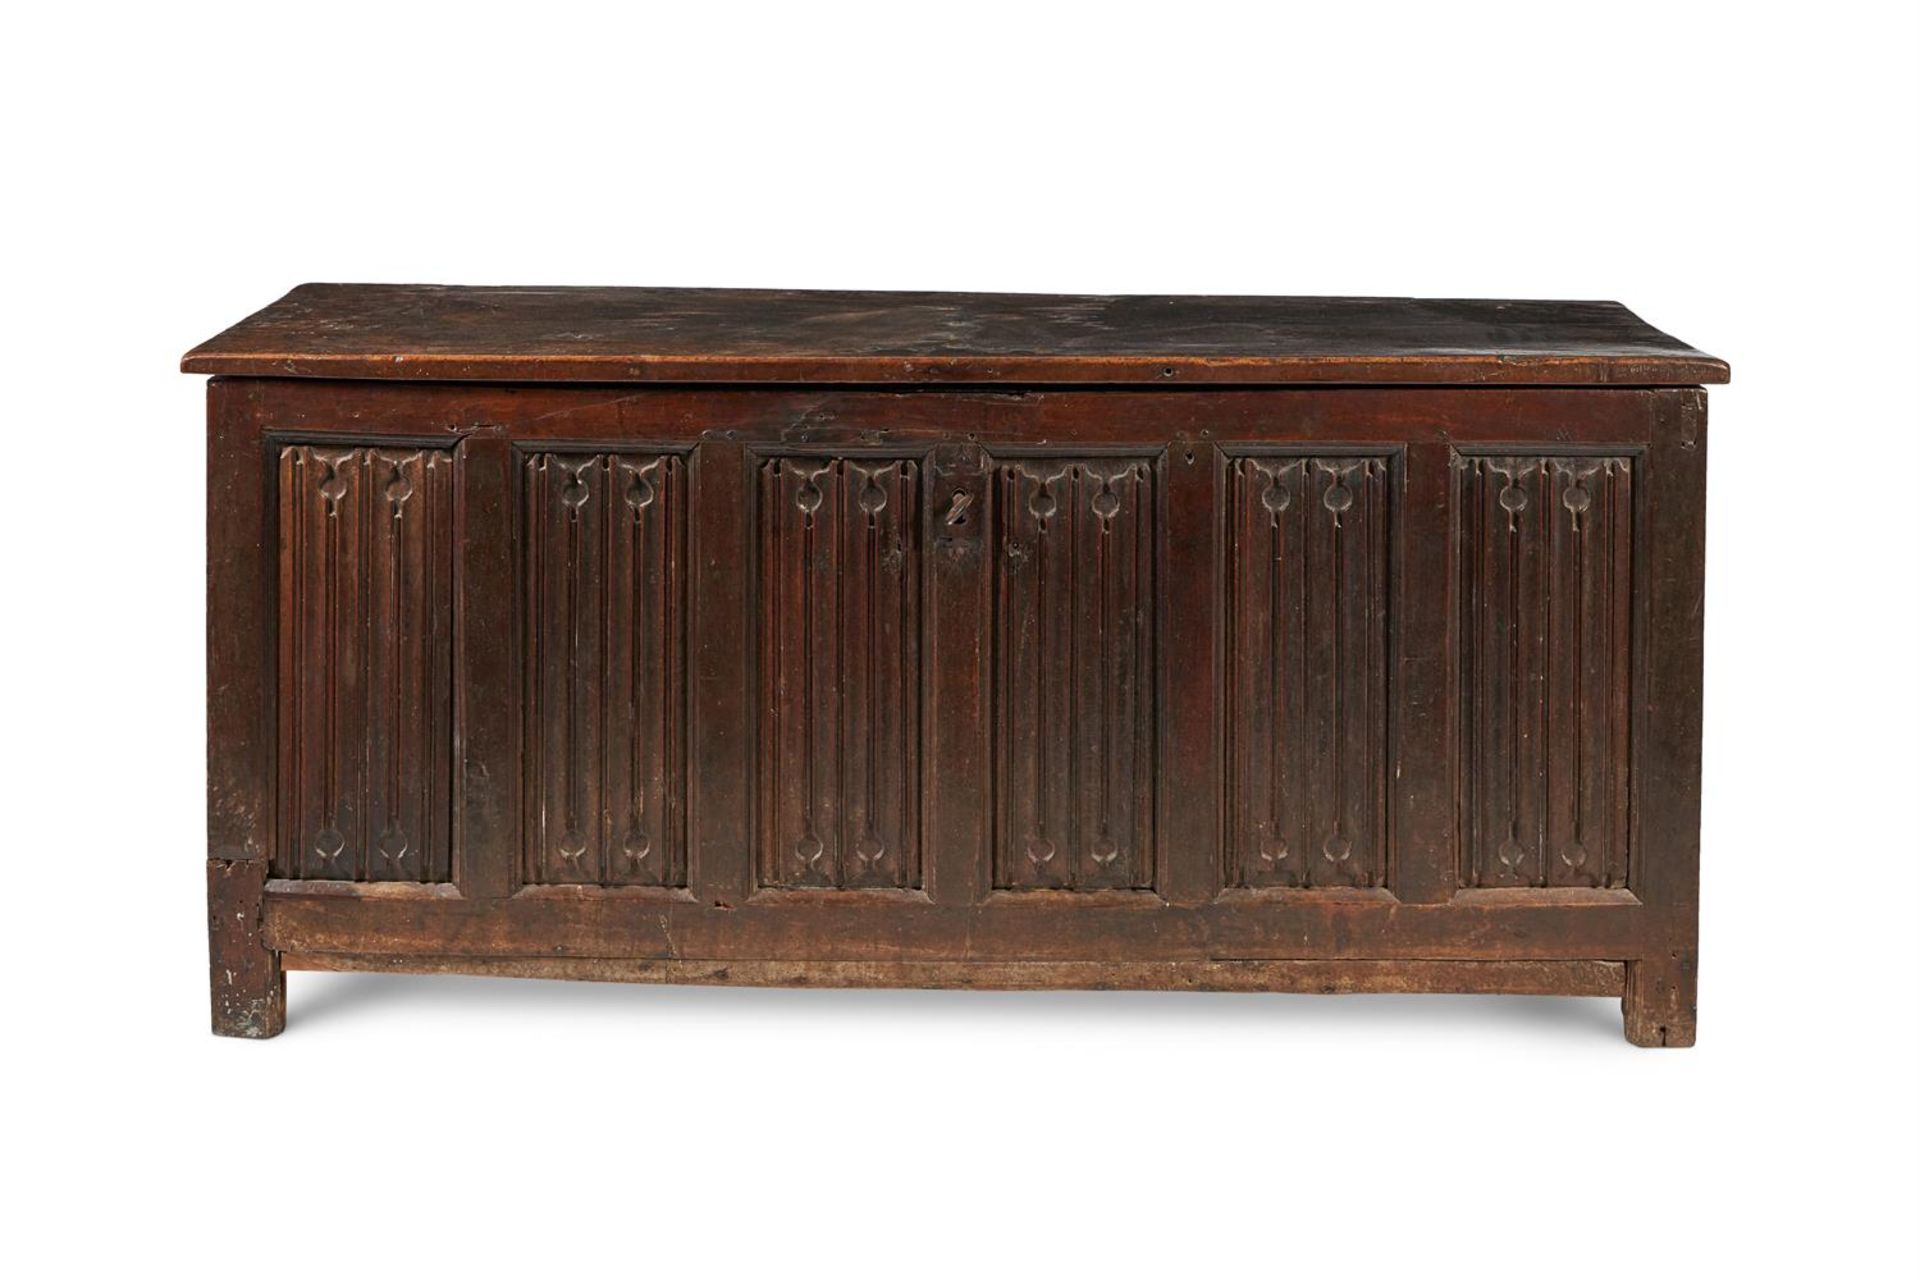 AN OAK COFFER, LATE 16TH/EARLY 17TH CENTURY - Image 3 of 4